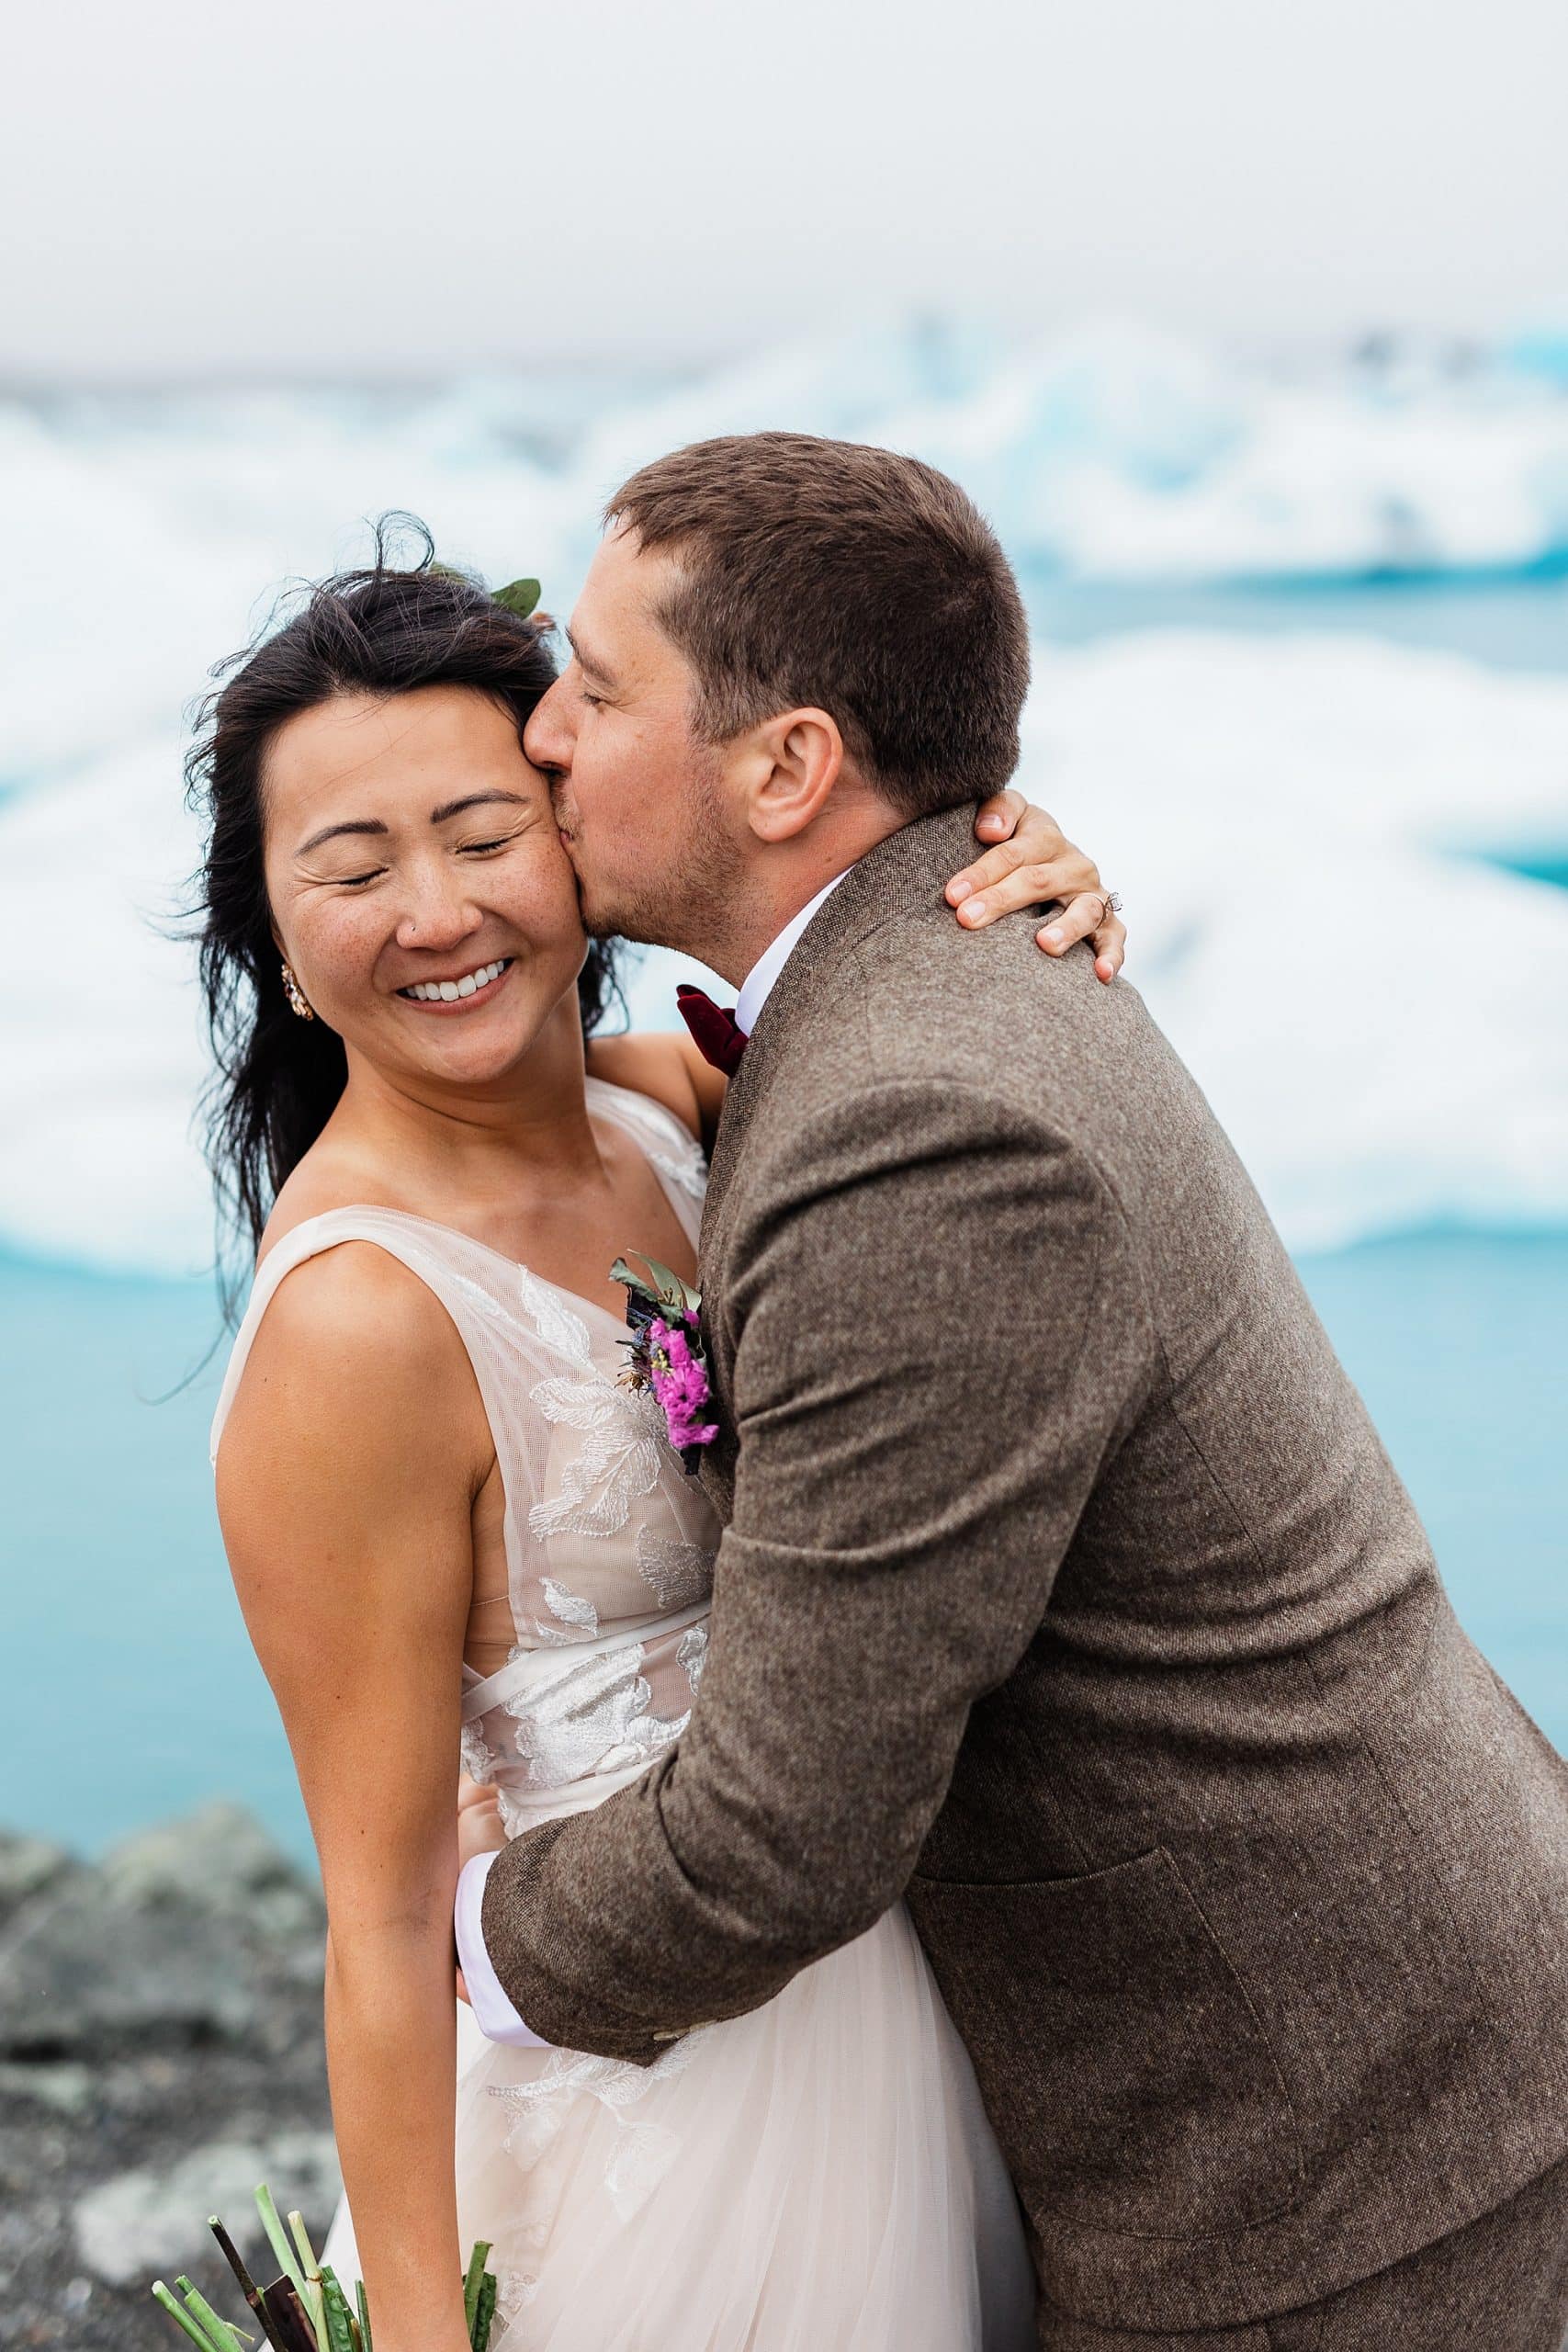 A couple kisses after they elope in Iceland near icebergs